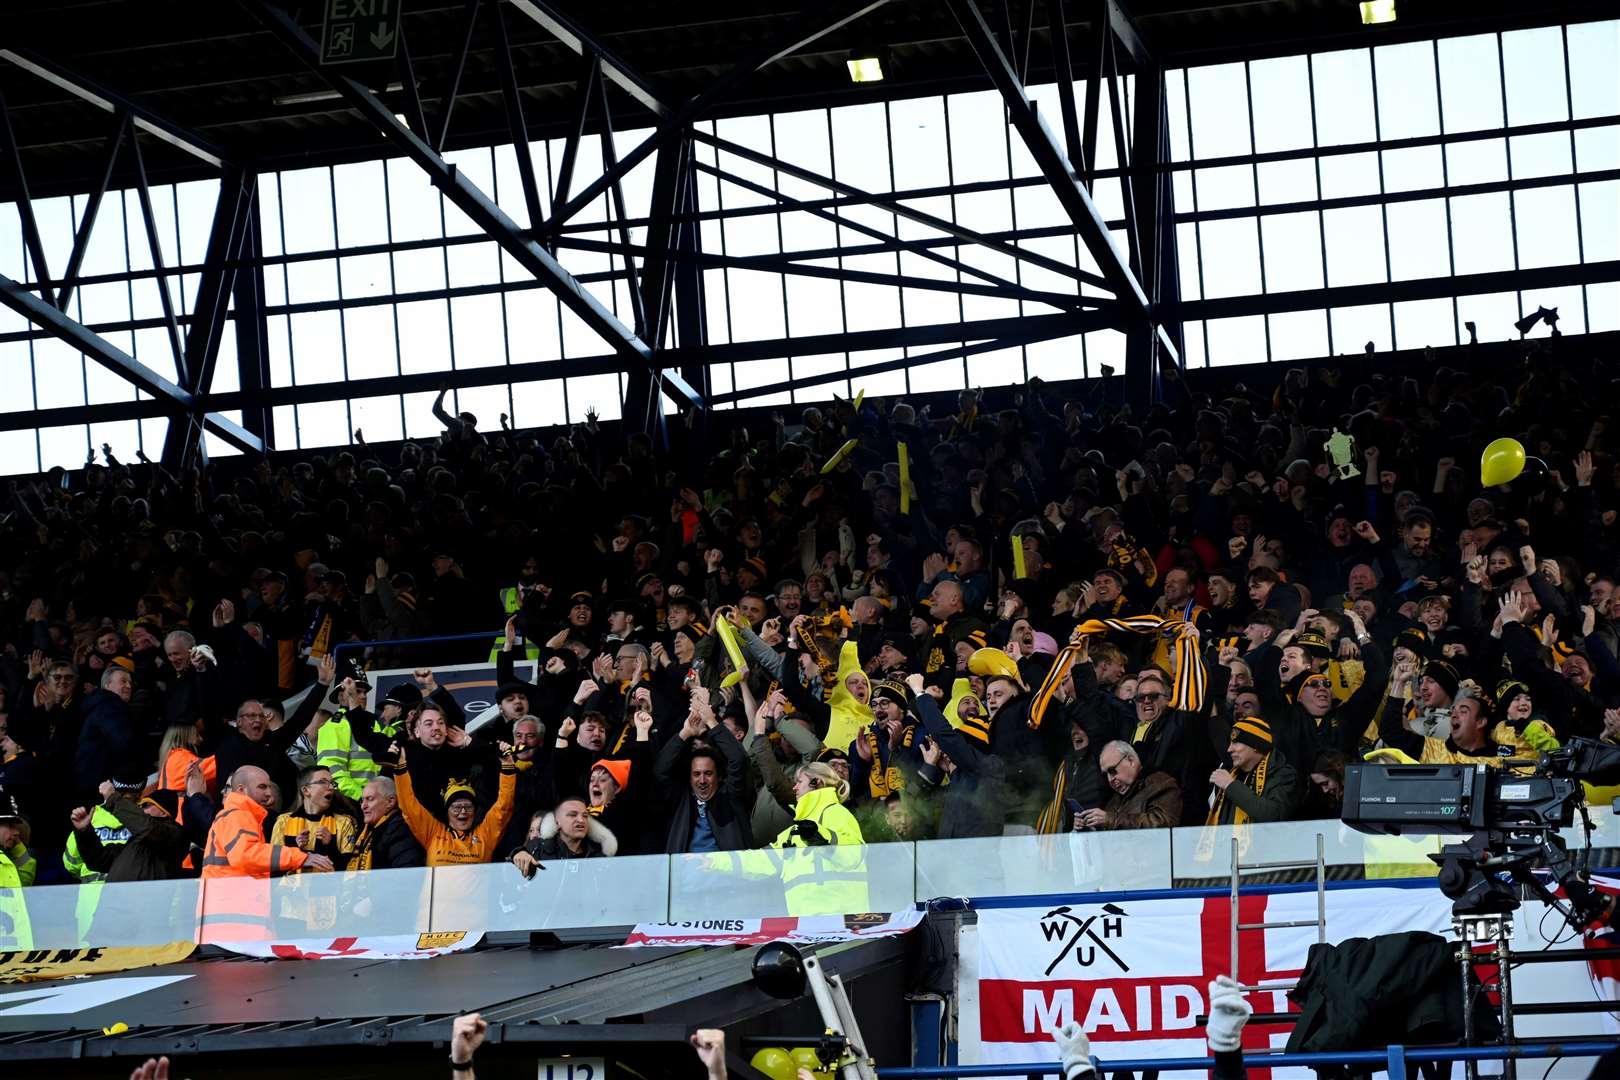 Maidstone supporters celebrating their victory at Portman Road. Picture: Barry Goodwin